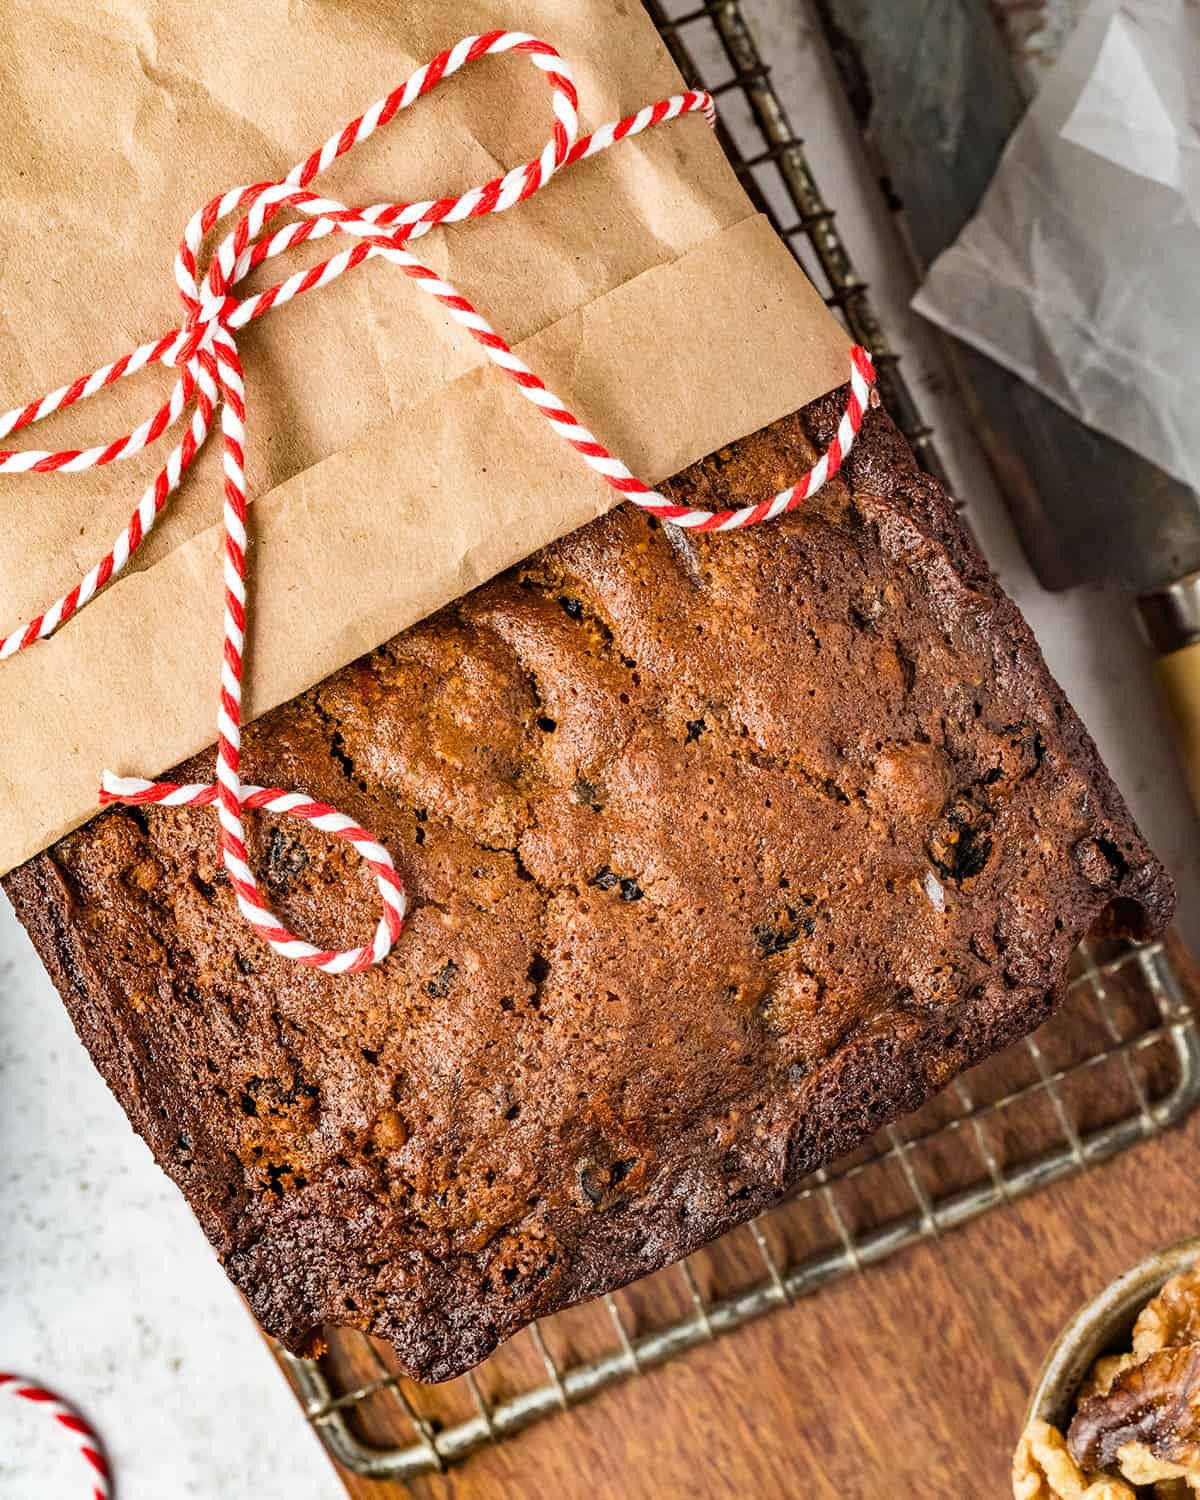 Fruit cake on a cooling rack, half covered with brown parchment paper and tied with red and white twine, sitting on a wood surface. 